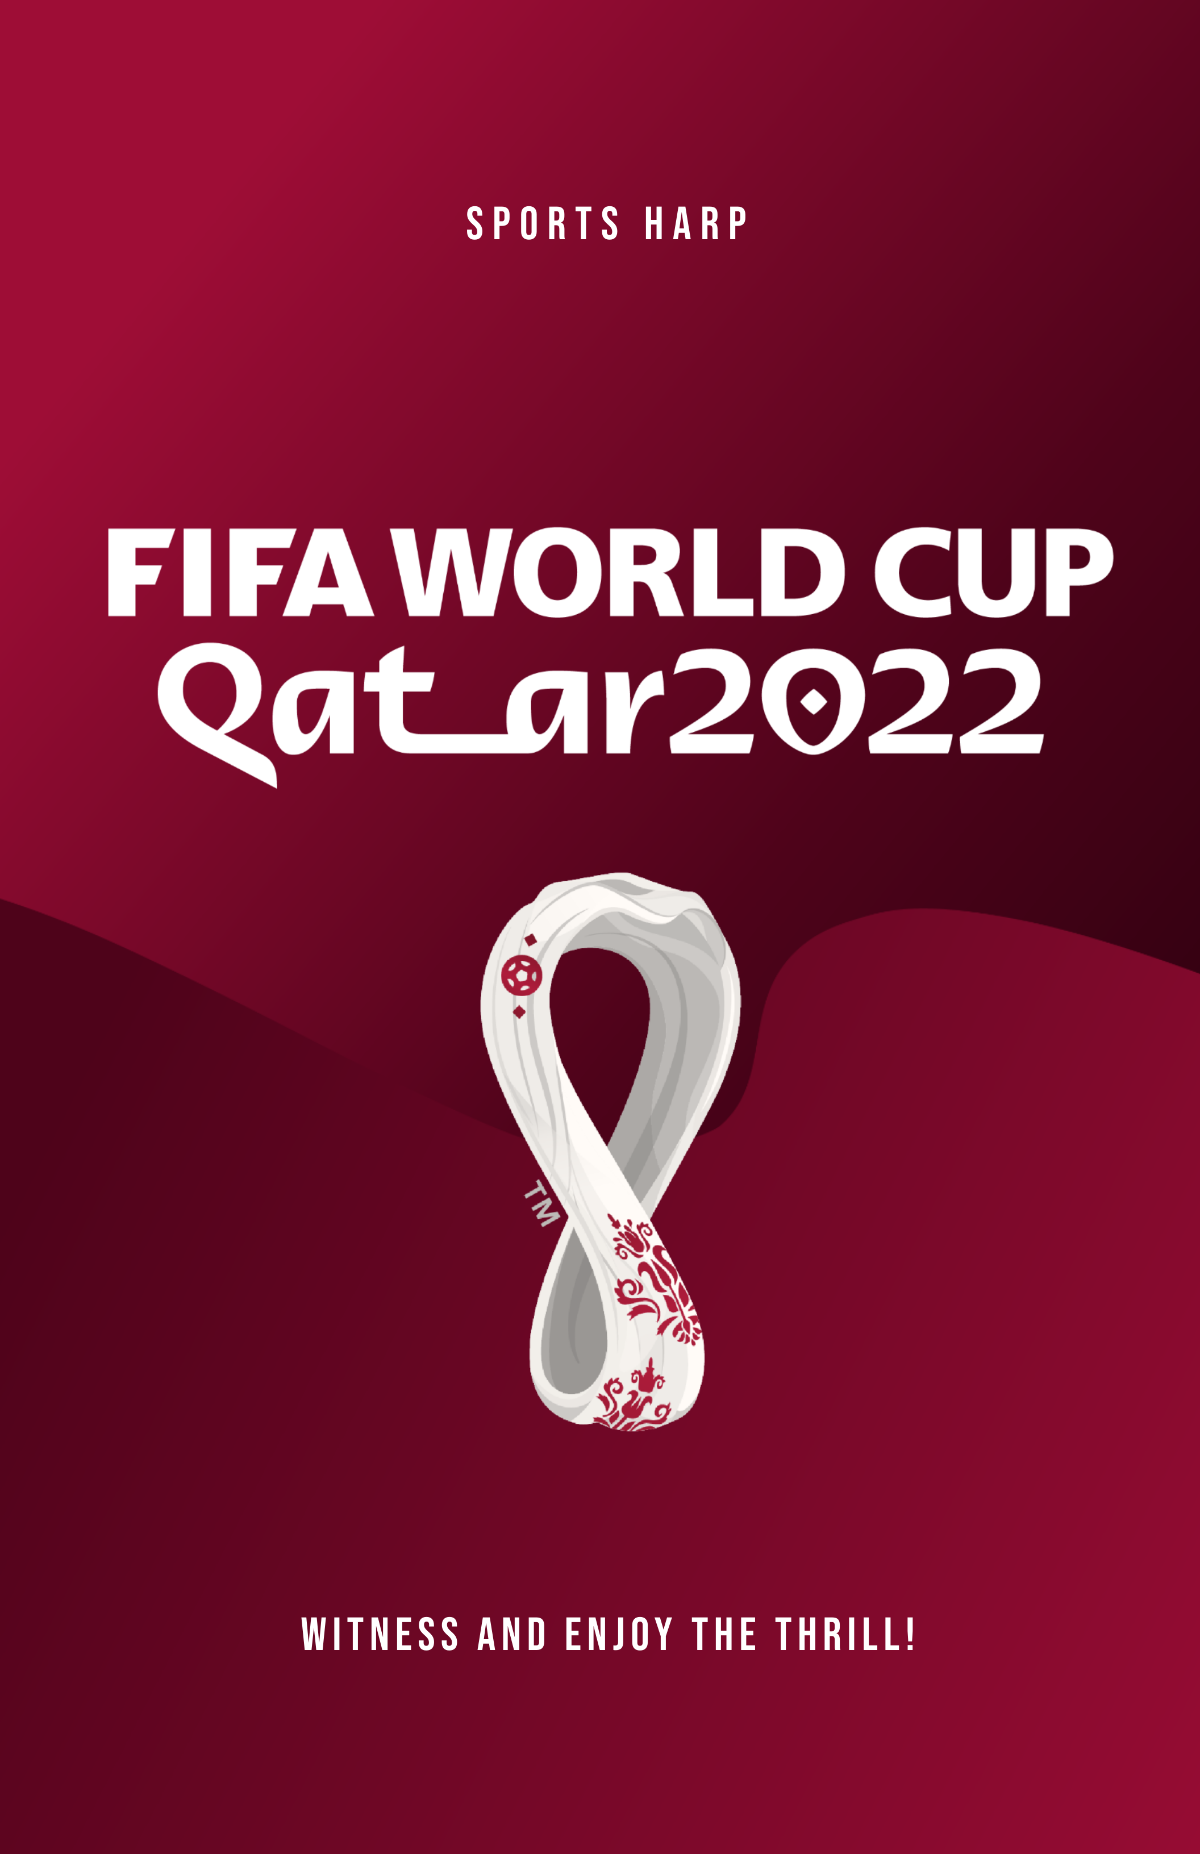 World Cup 2022 Poster Template